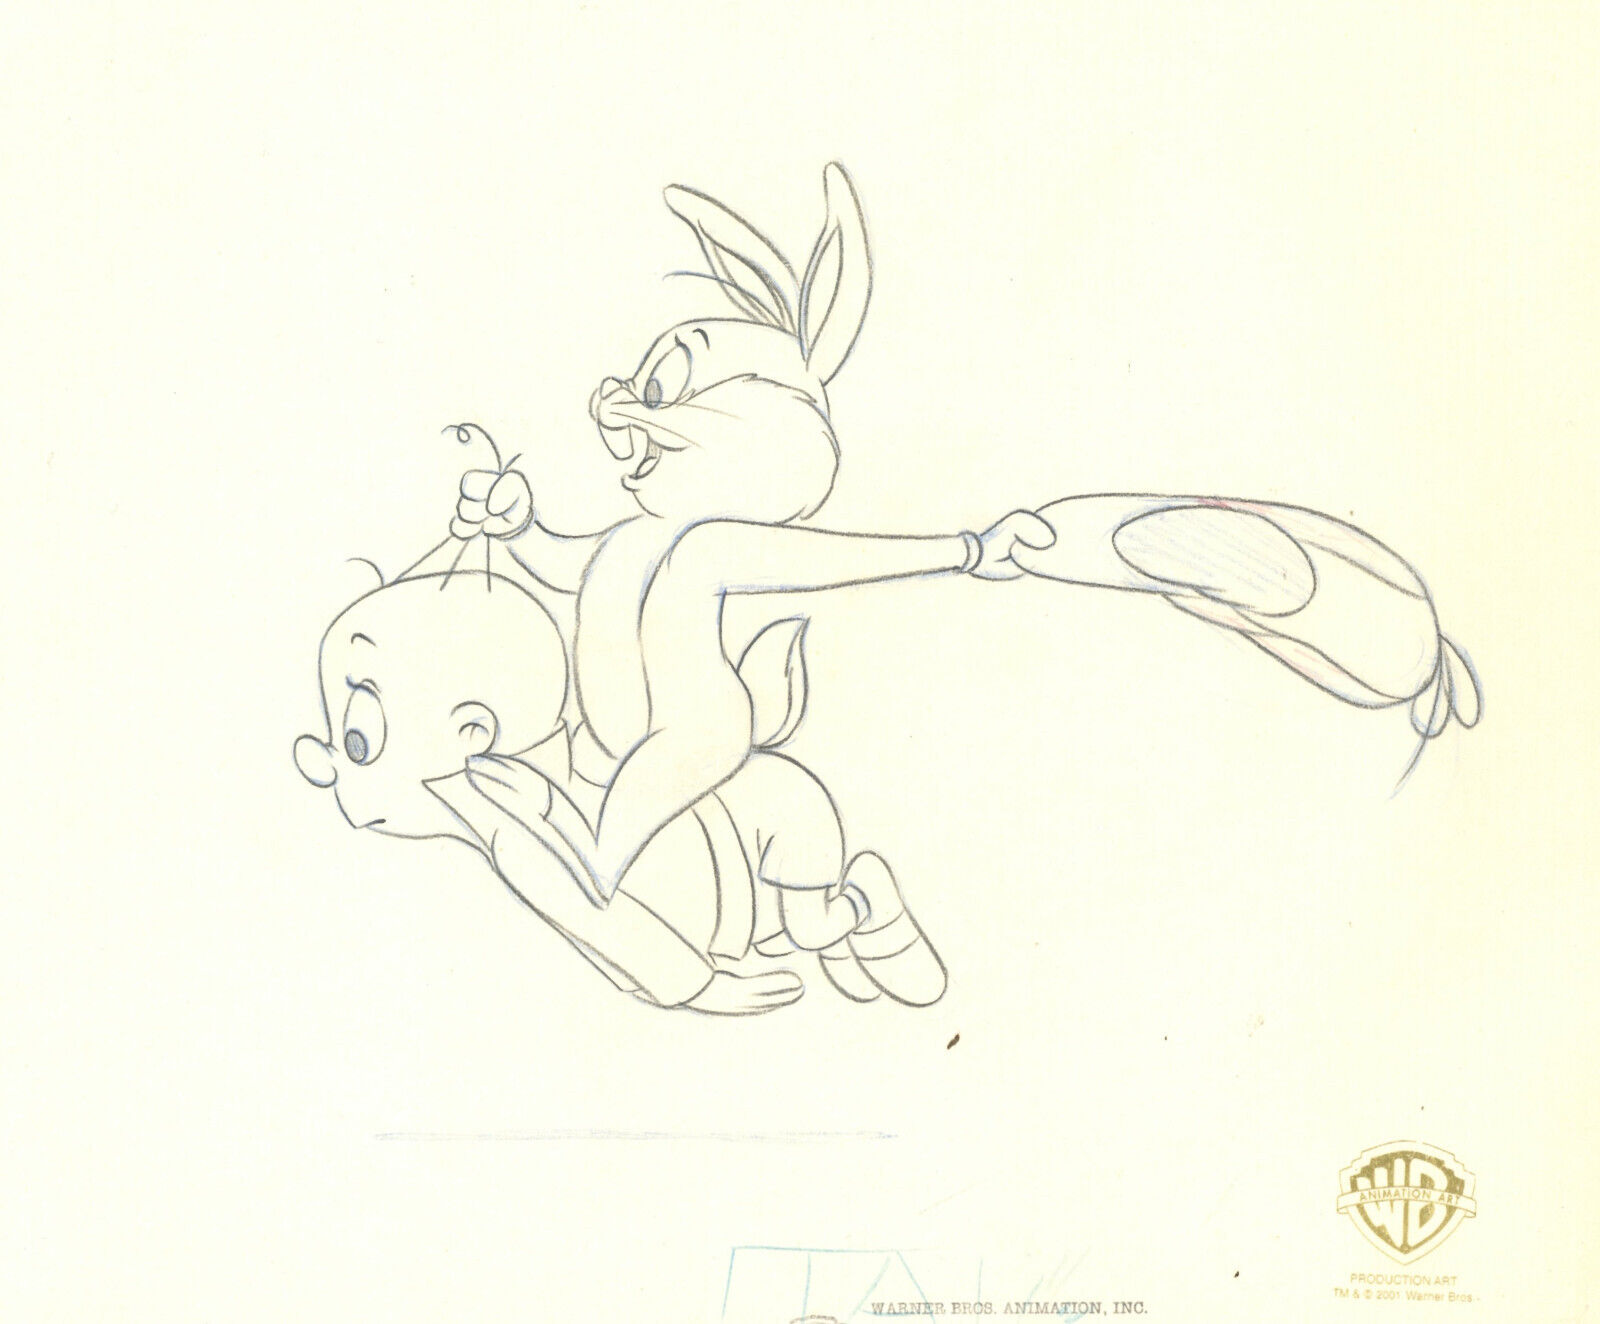 Warner Brothers-Original Production Drawing- Baby Bugs Bunny and Elmer Fudd